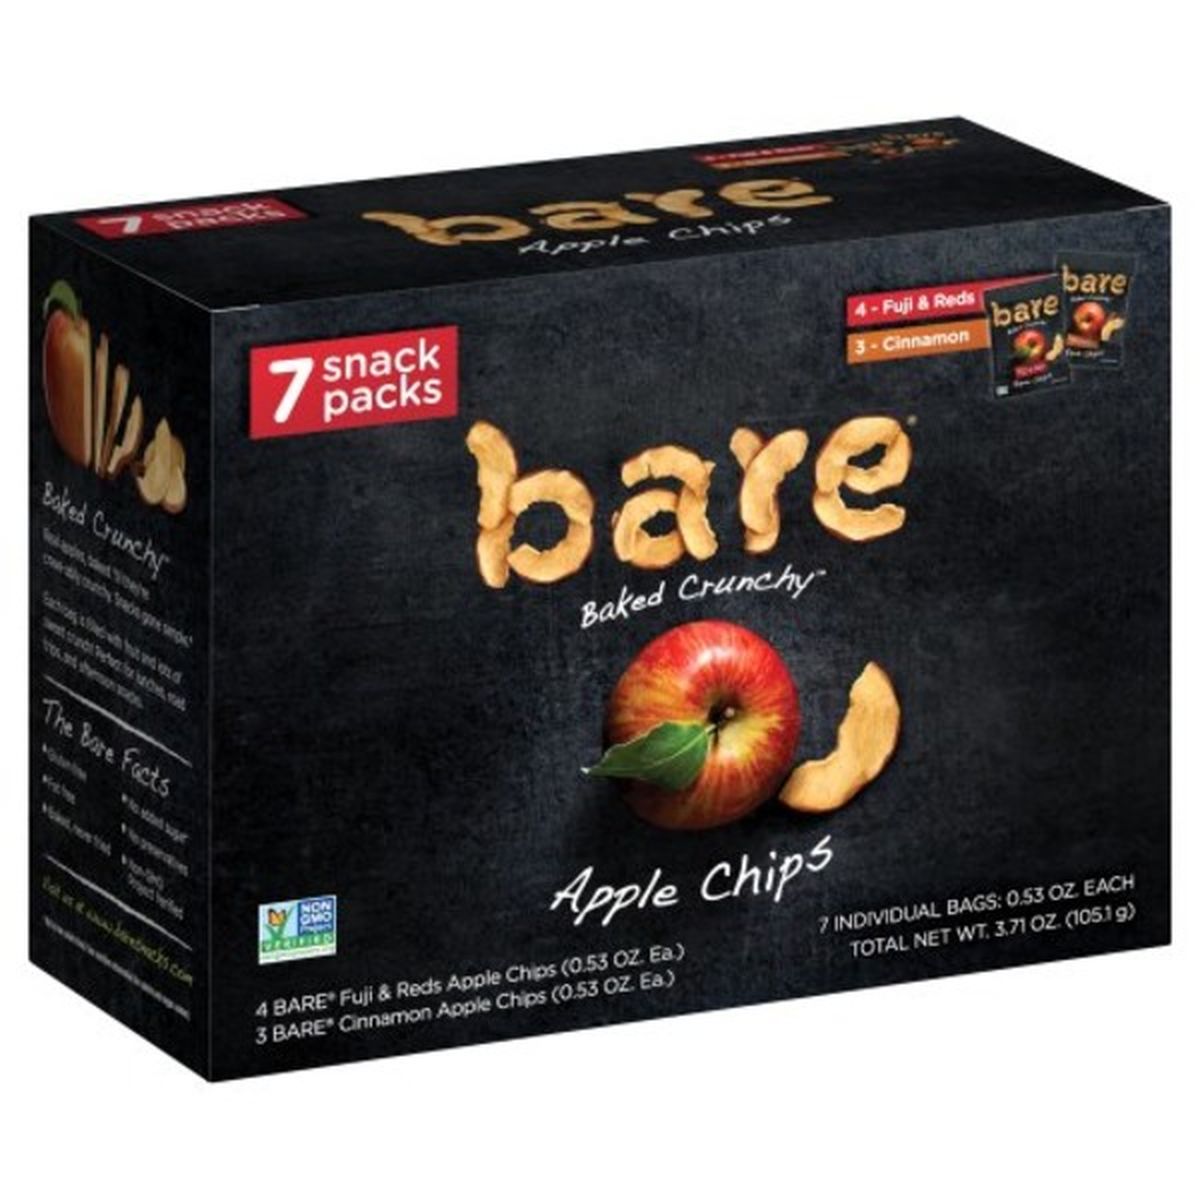 Calories in Bare Baked Crunchy Apple Chips, Fuji & Reds, Cinnamon Snack Pack